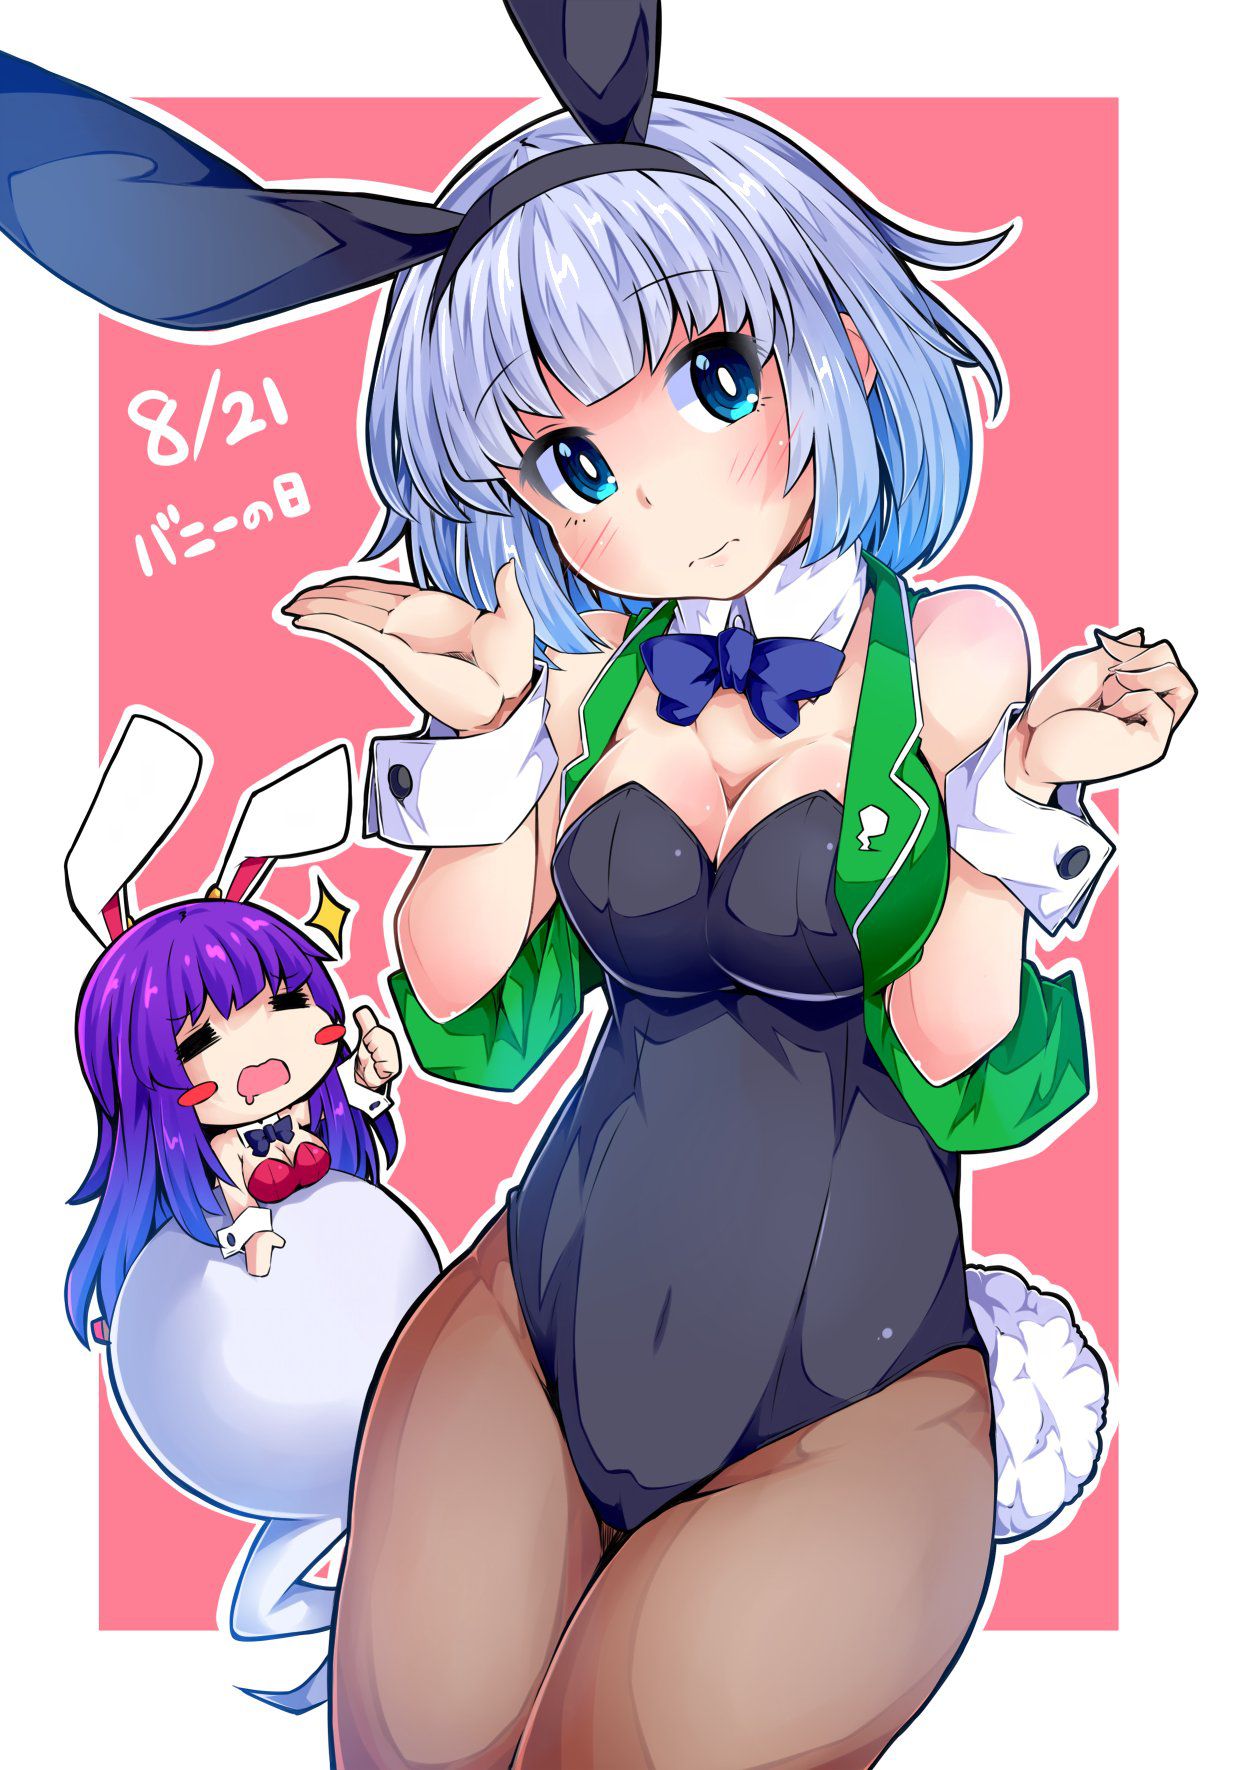 Two-dimensional Bunny girl erotic pictures. This would take away! 27